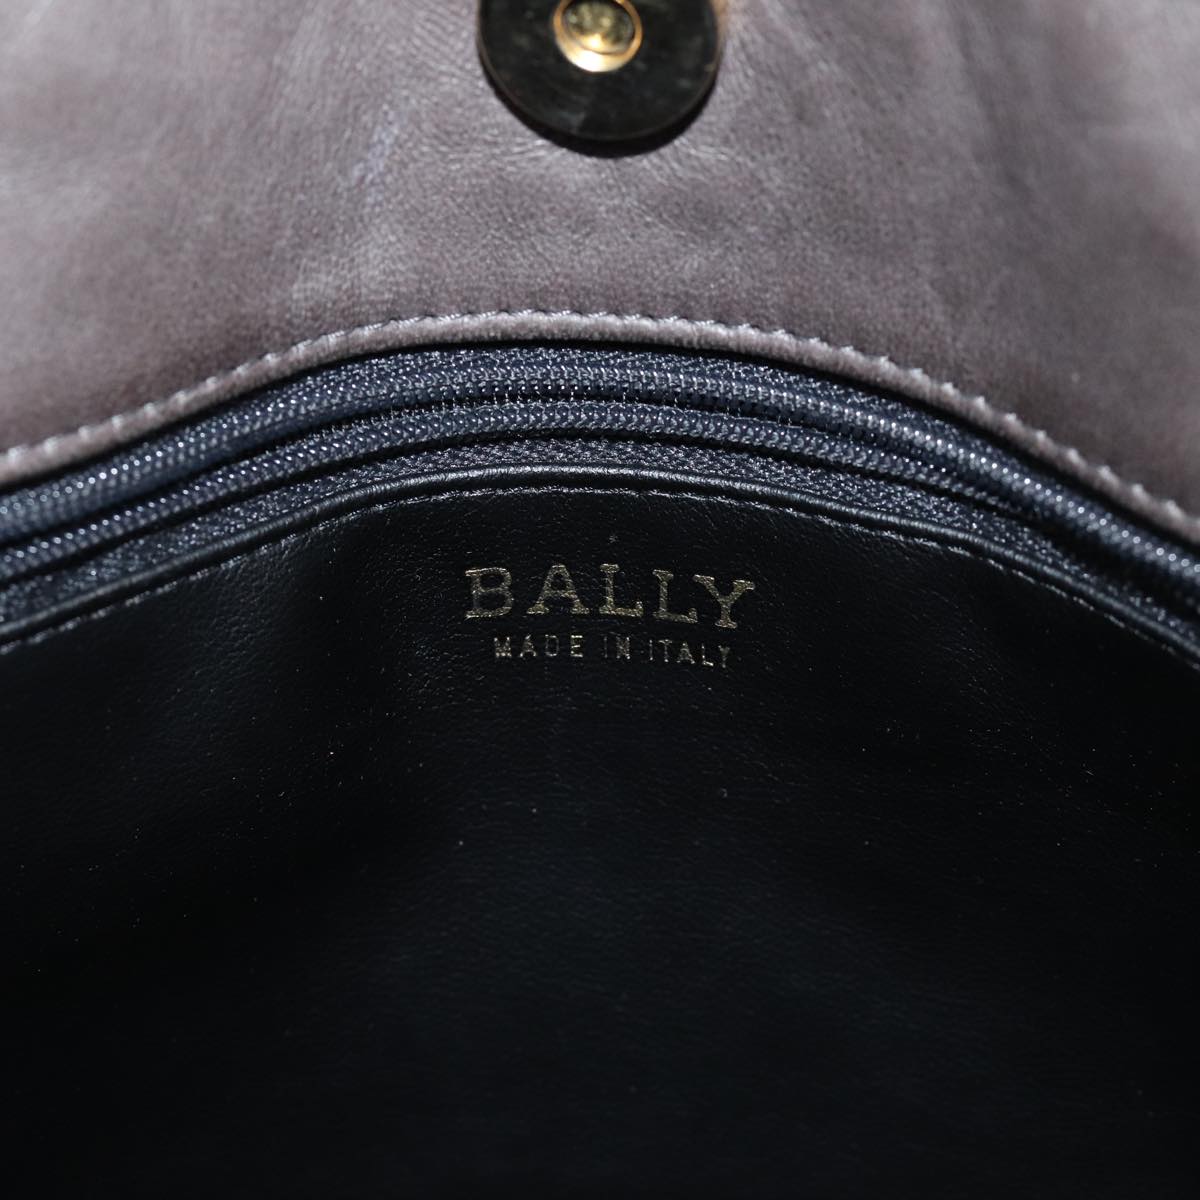 BALLY Shoulder Bag Leather Gray Auth 69675